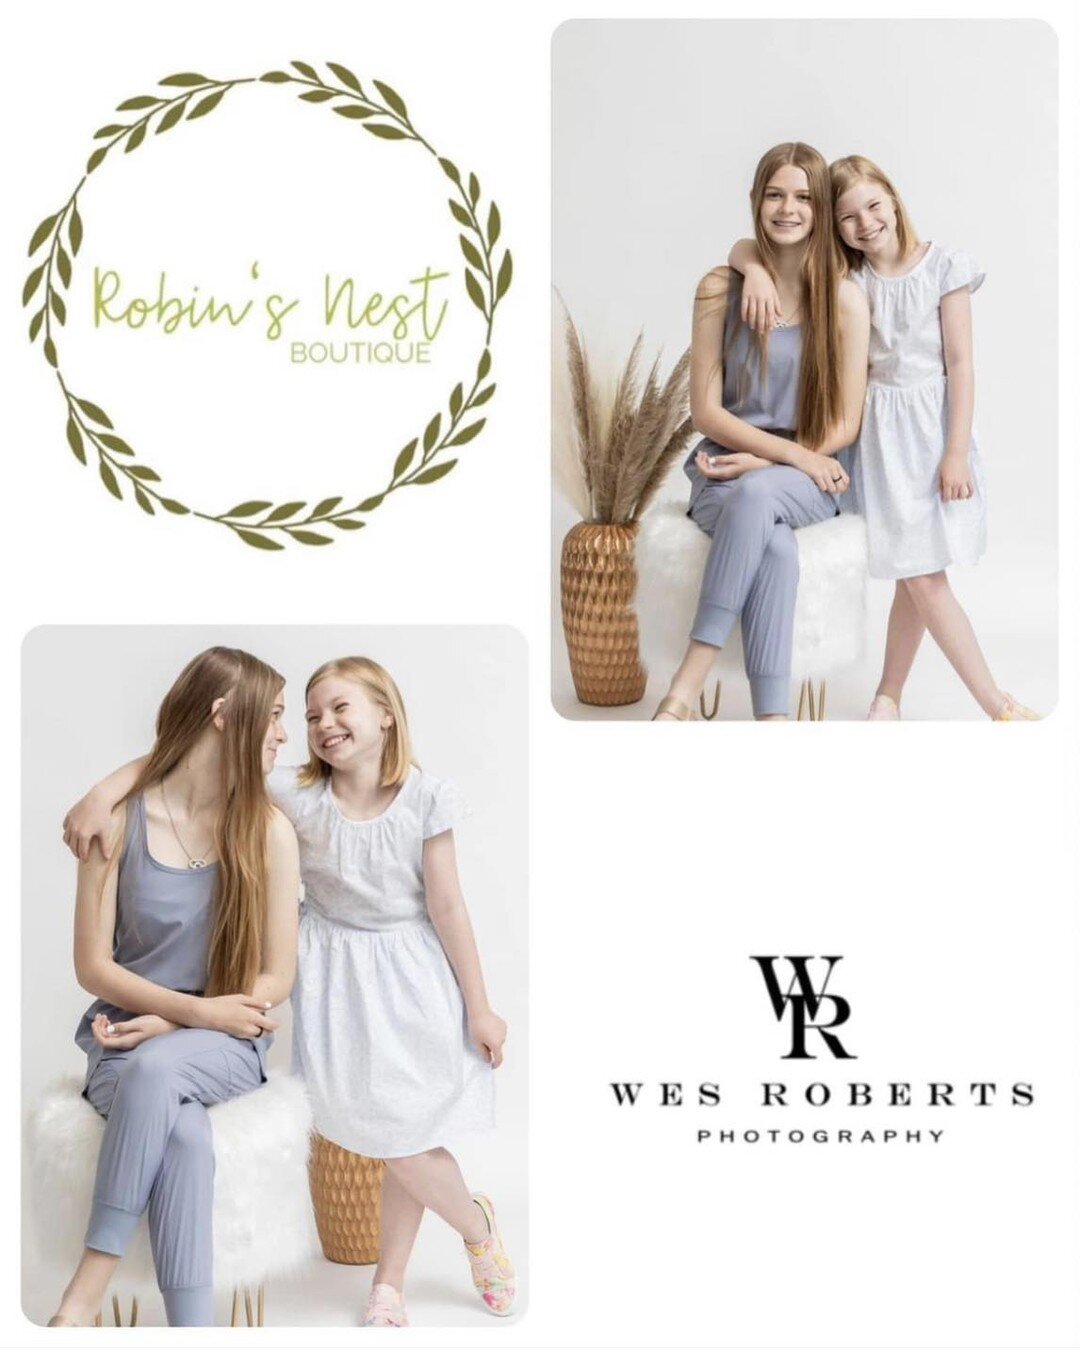 I&rsquo;m teaming up with Robin&rsquo;s Nest Boutique to offer Mother&rsquo;s Day mini session on Sunday, May 7th.  Come join us! 

$100: up to 10 digital photos &amp; $50 RNB gift card 

*one immediate family per time slot

https://square.site/book/